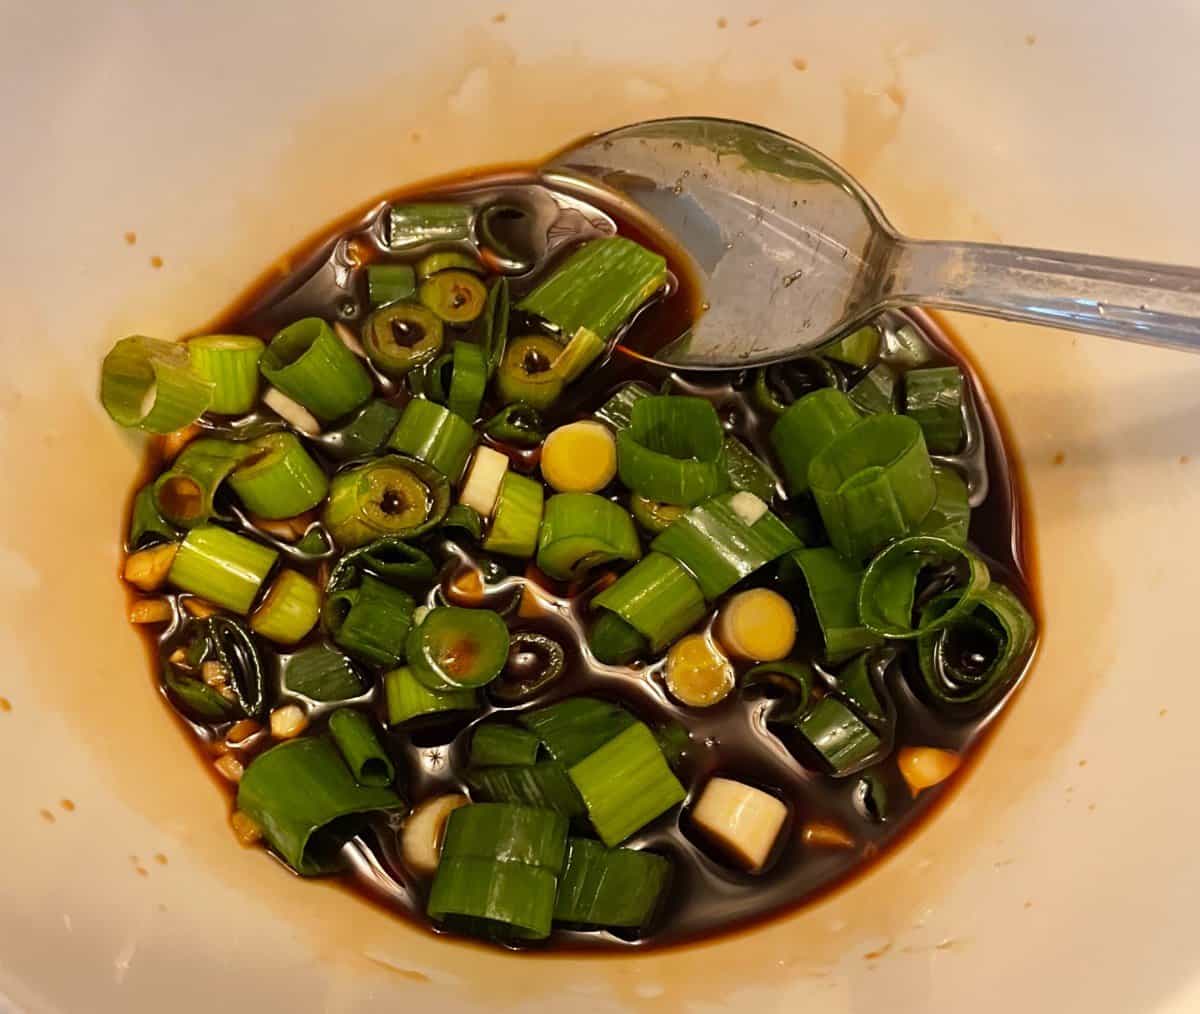 Stir fry sauce made with diced green onions in a small bowl.